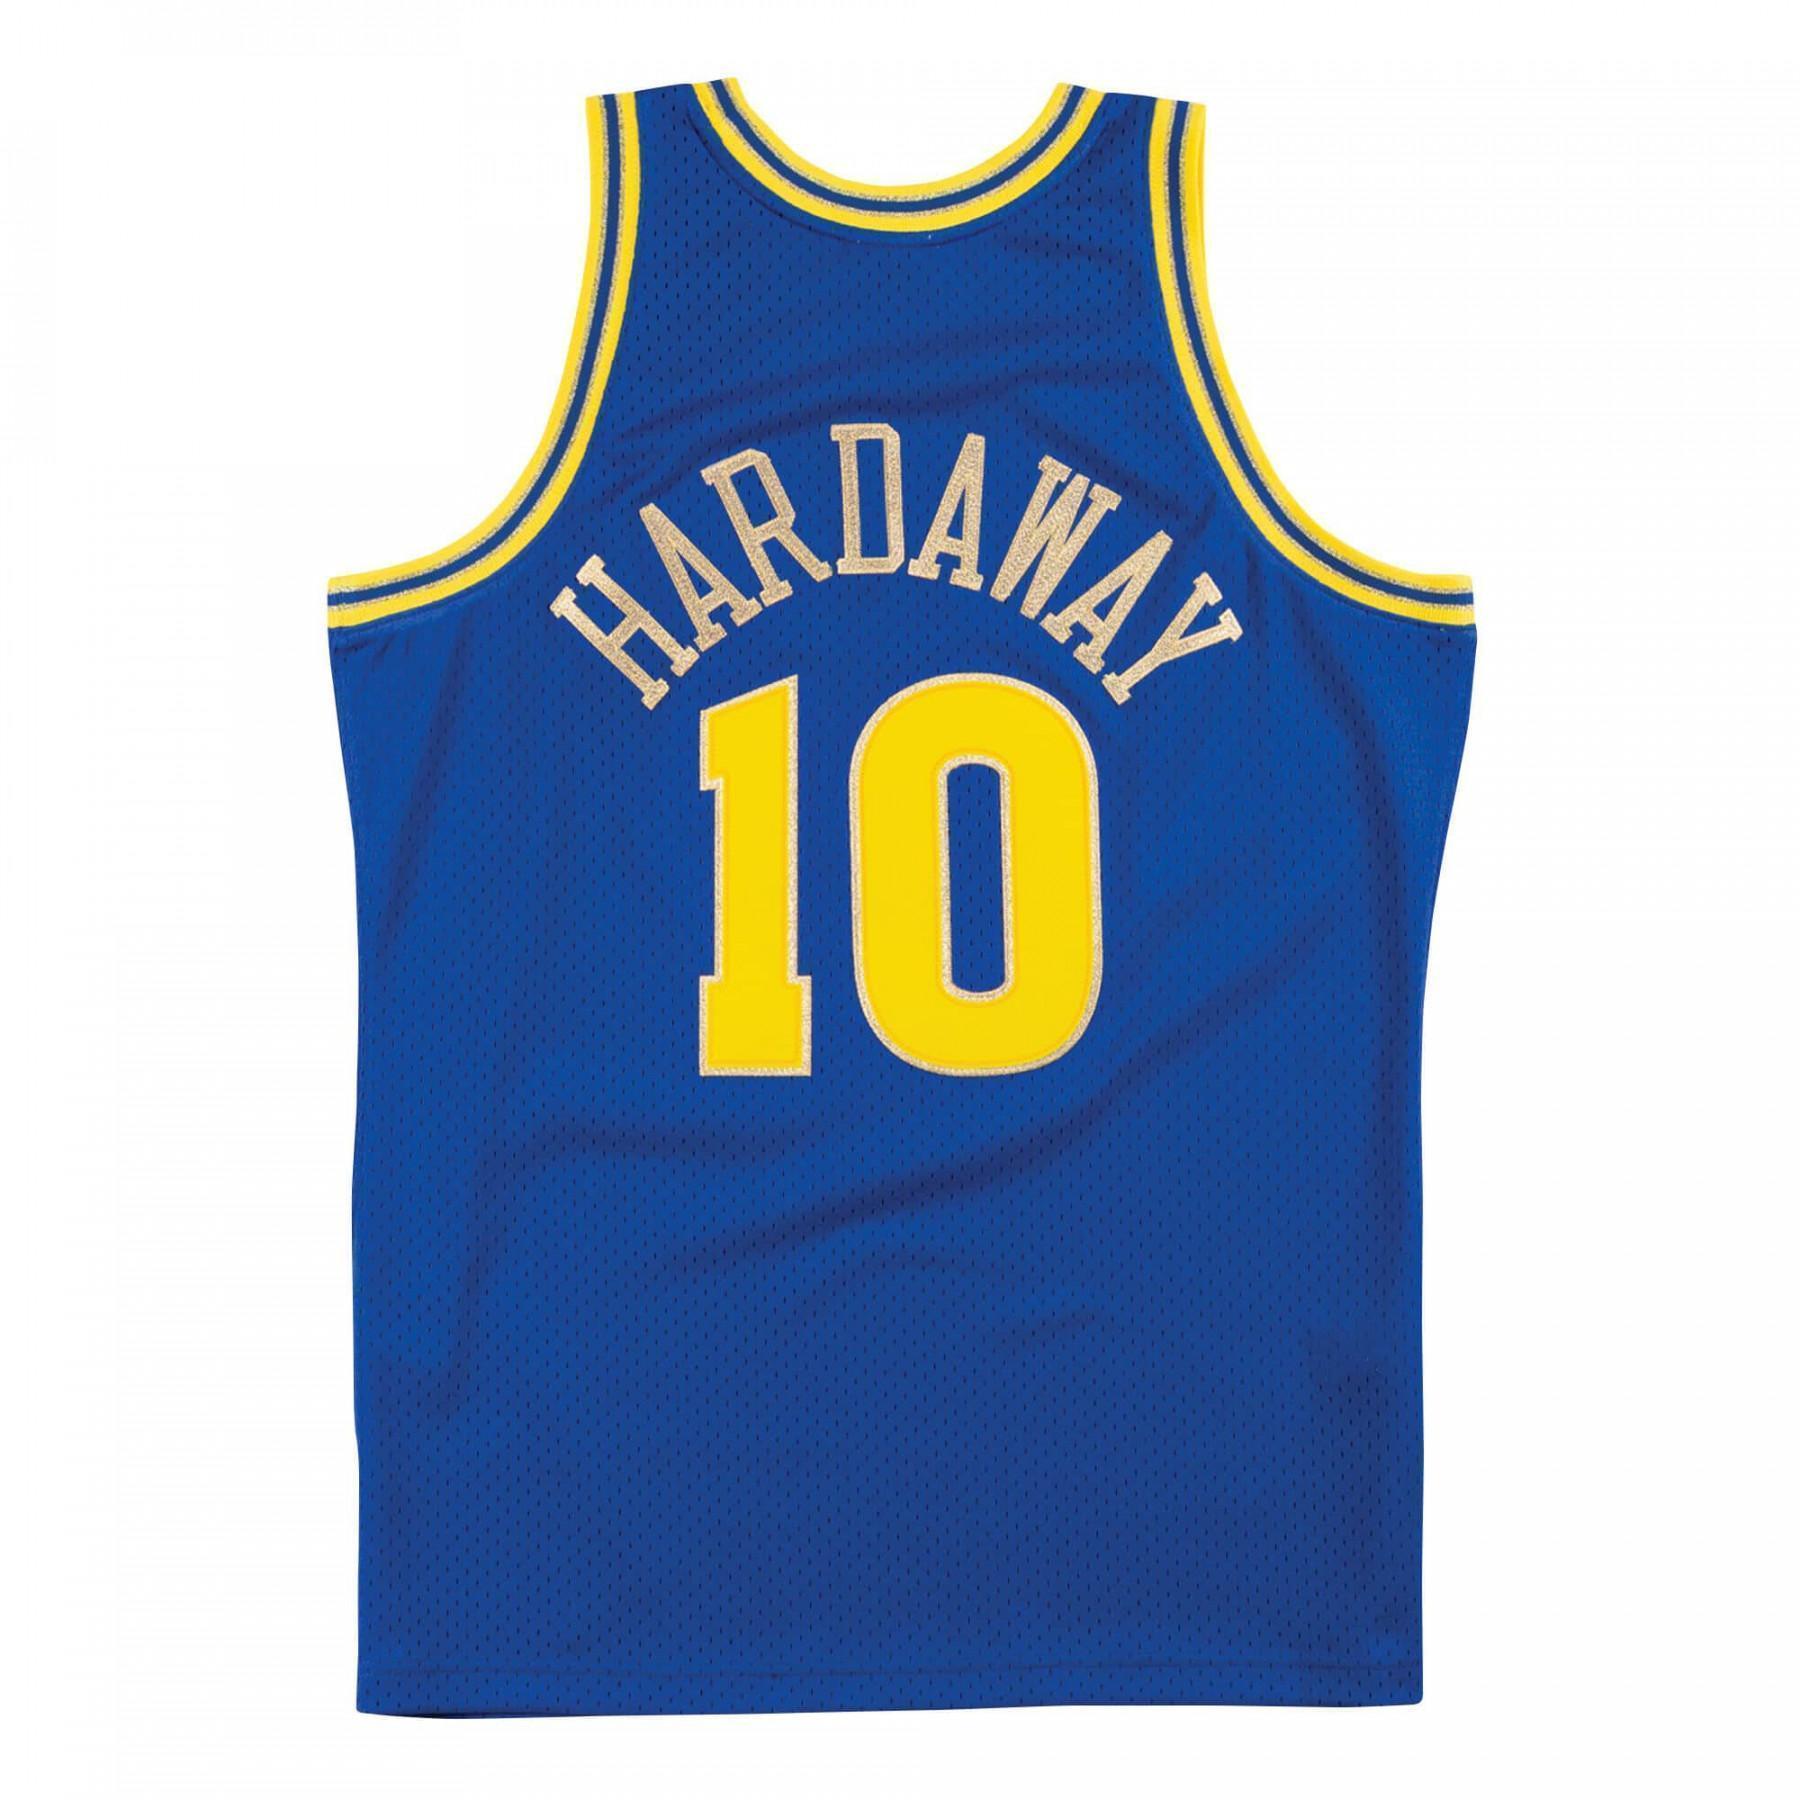 Camisola Mitchell & Ness Cny Golden State Warriors